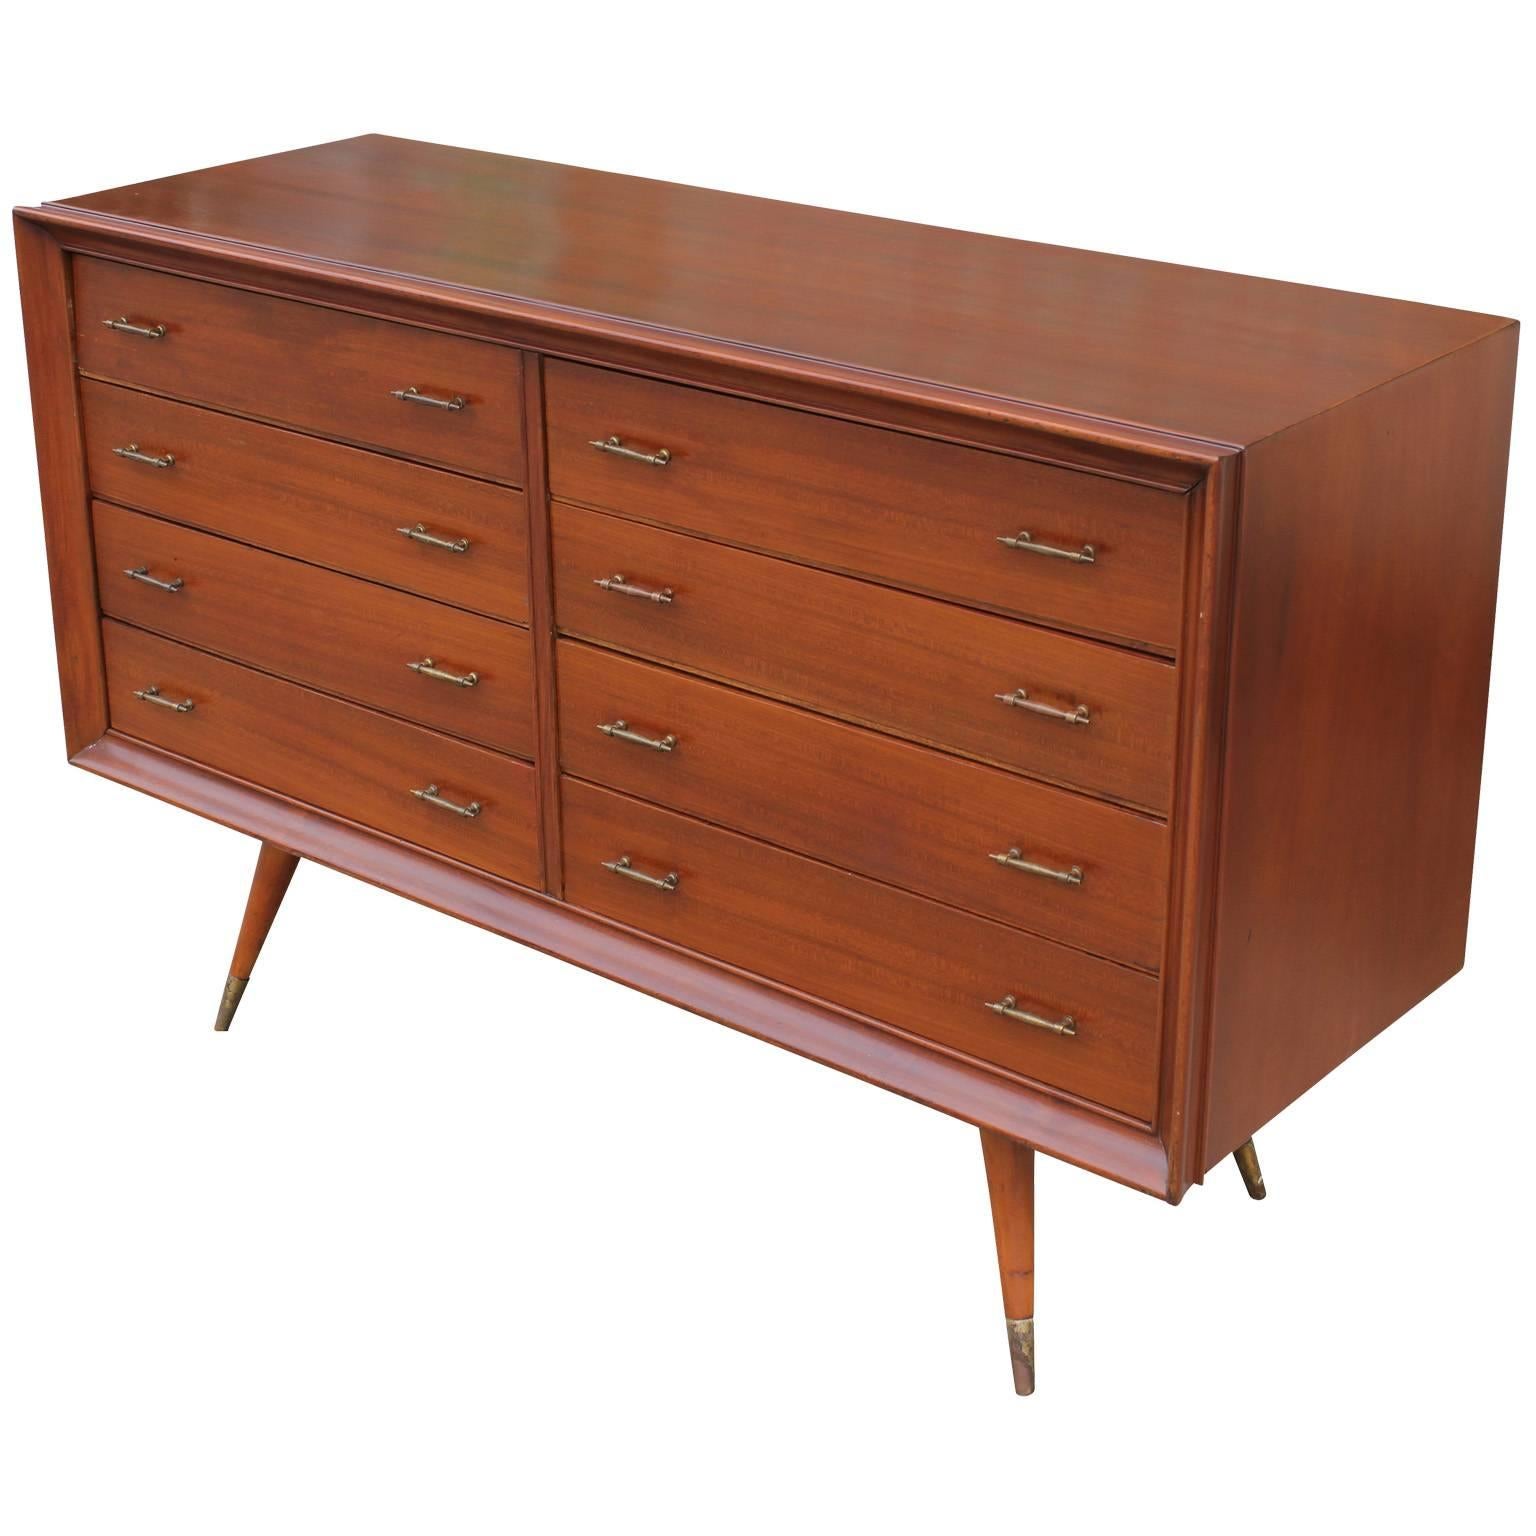 Beautiful Argentinian eight-drawer dresser. Dresser has a wonderful attention to detail-making this a great transitional piece. Tapered and splayed legs are capped in brass.